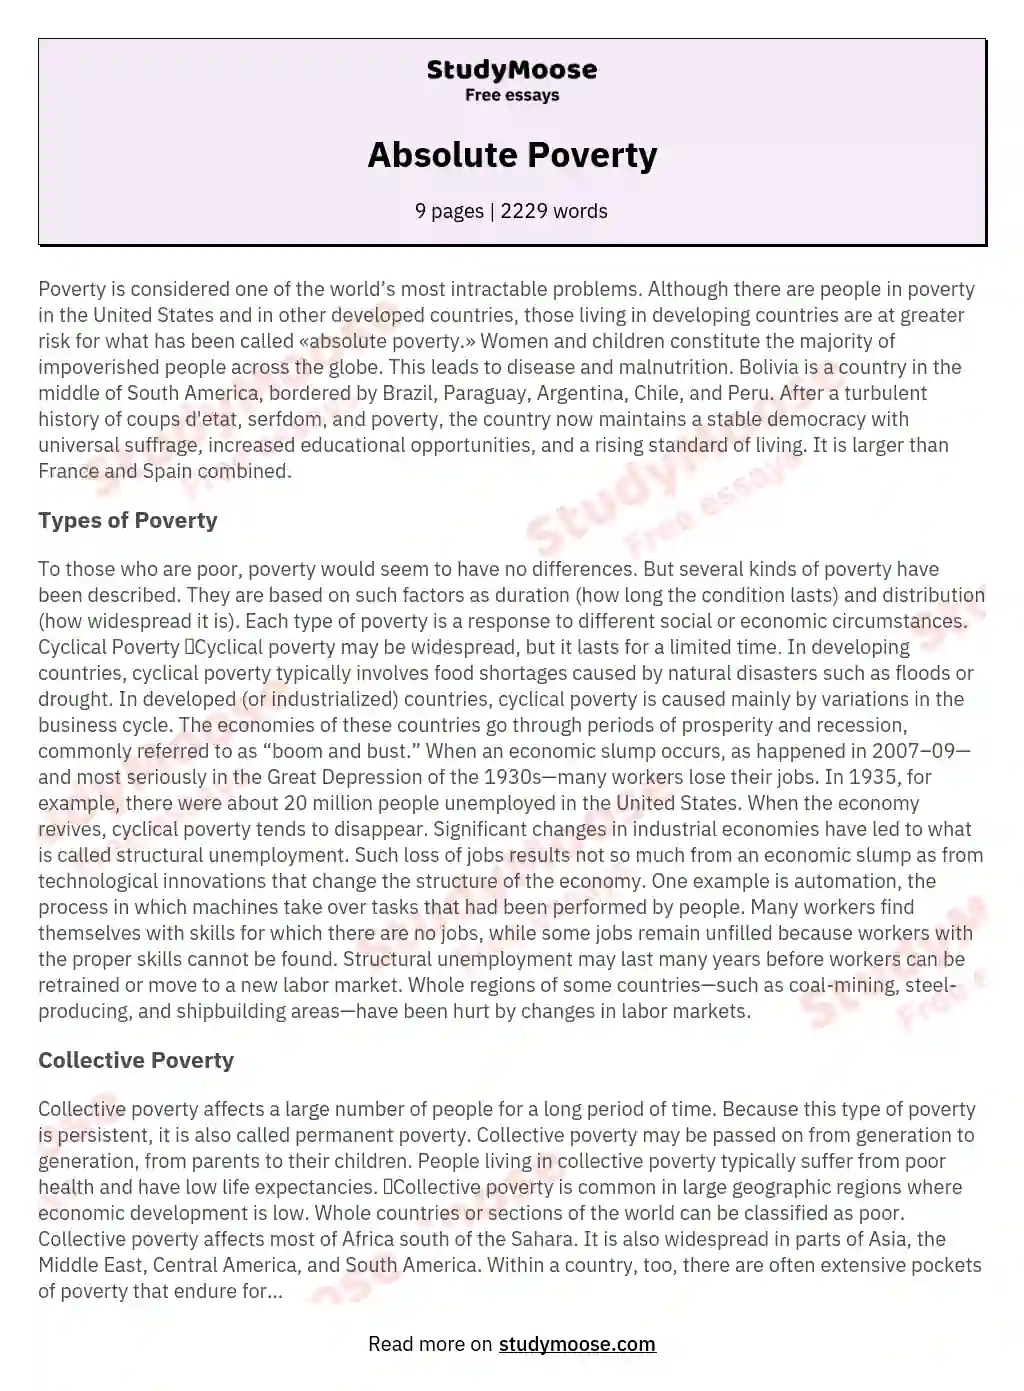 Absolute Poverty essay